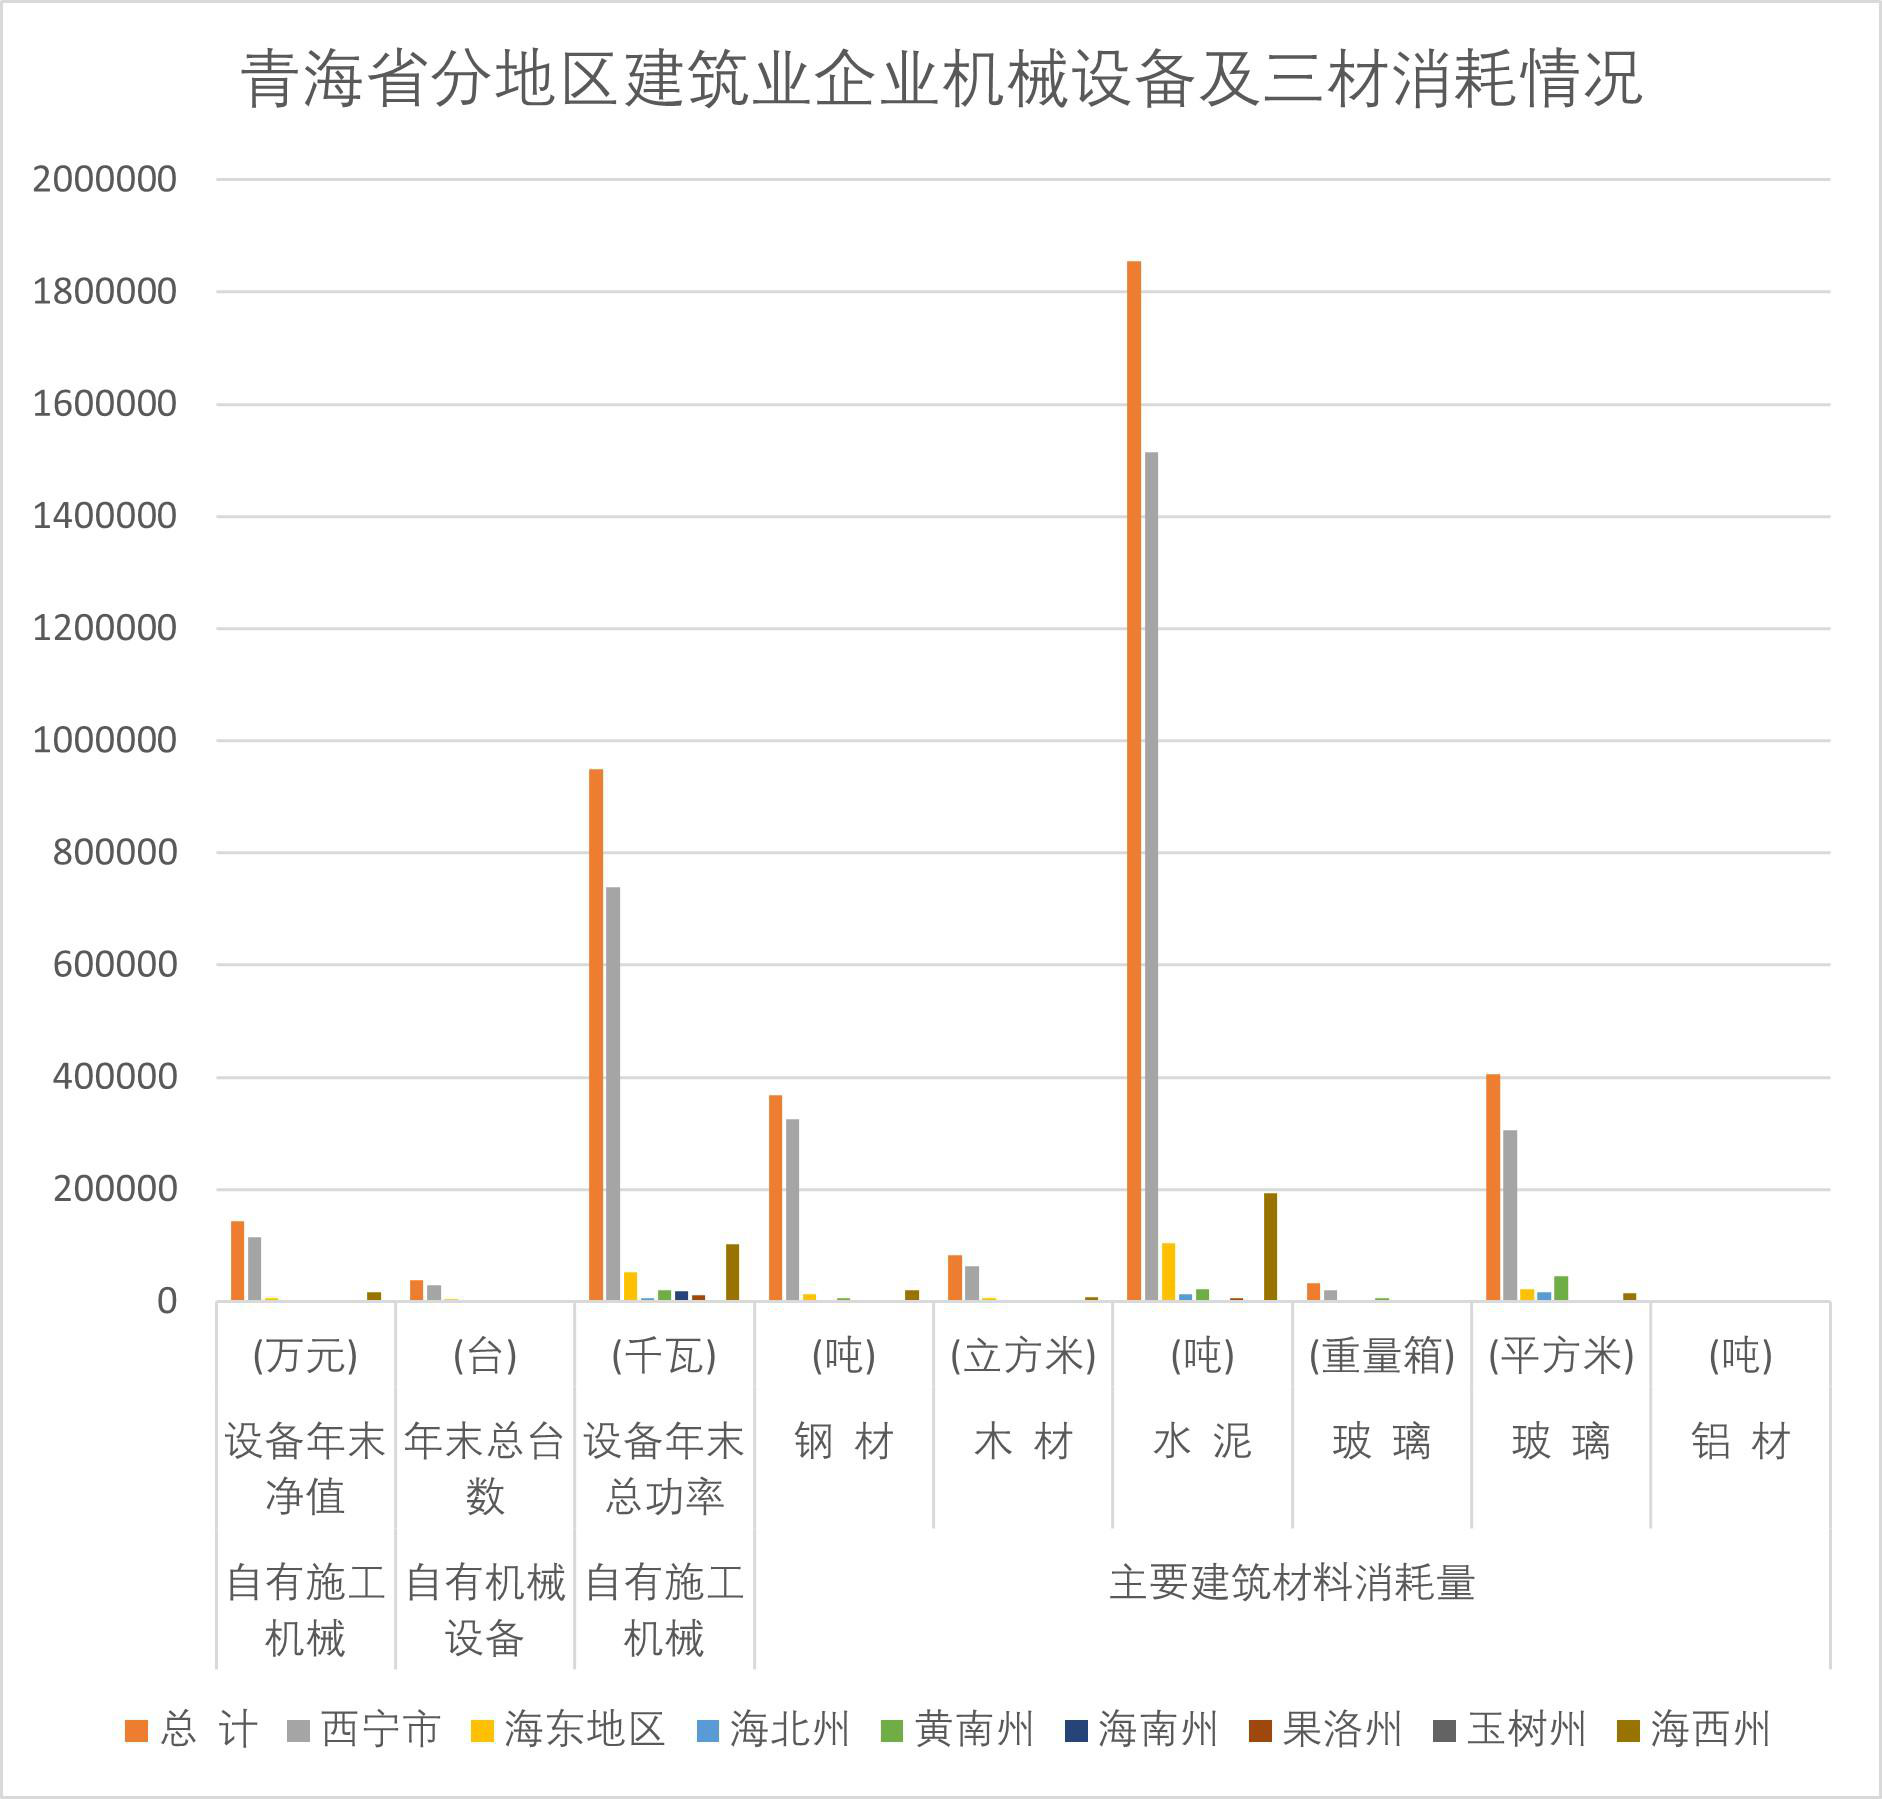 Consumption of machinery, equipment and three materials of construction enterprises in different regions of Qinghai Province (2004-2007)